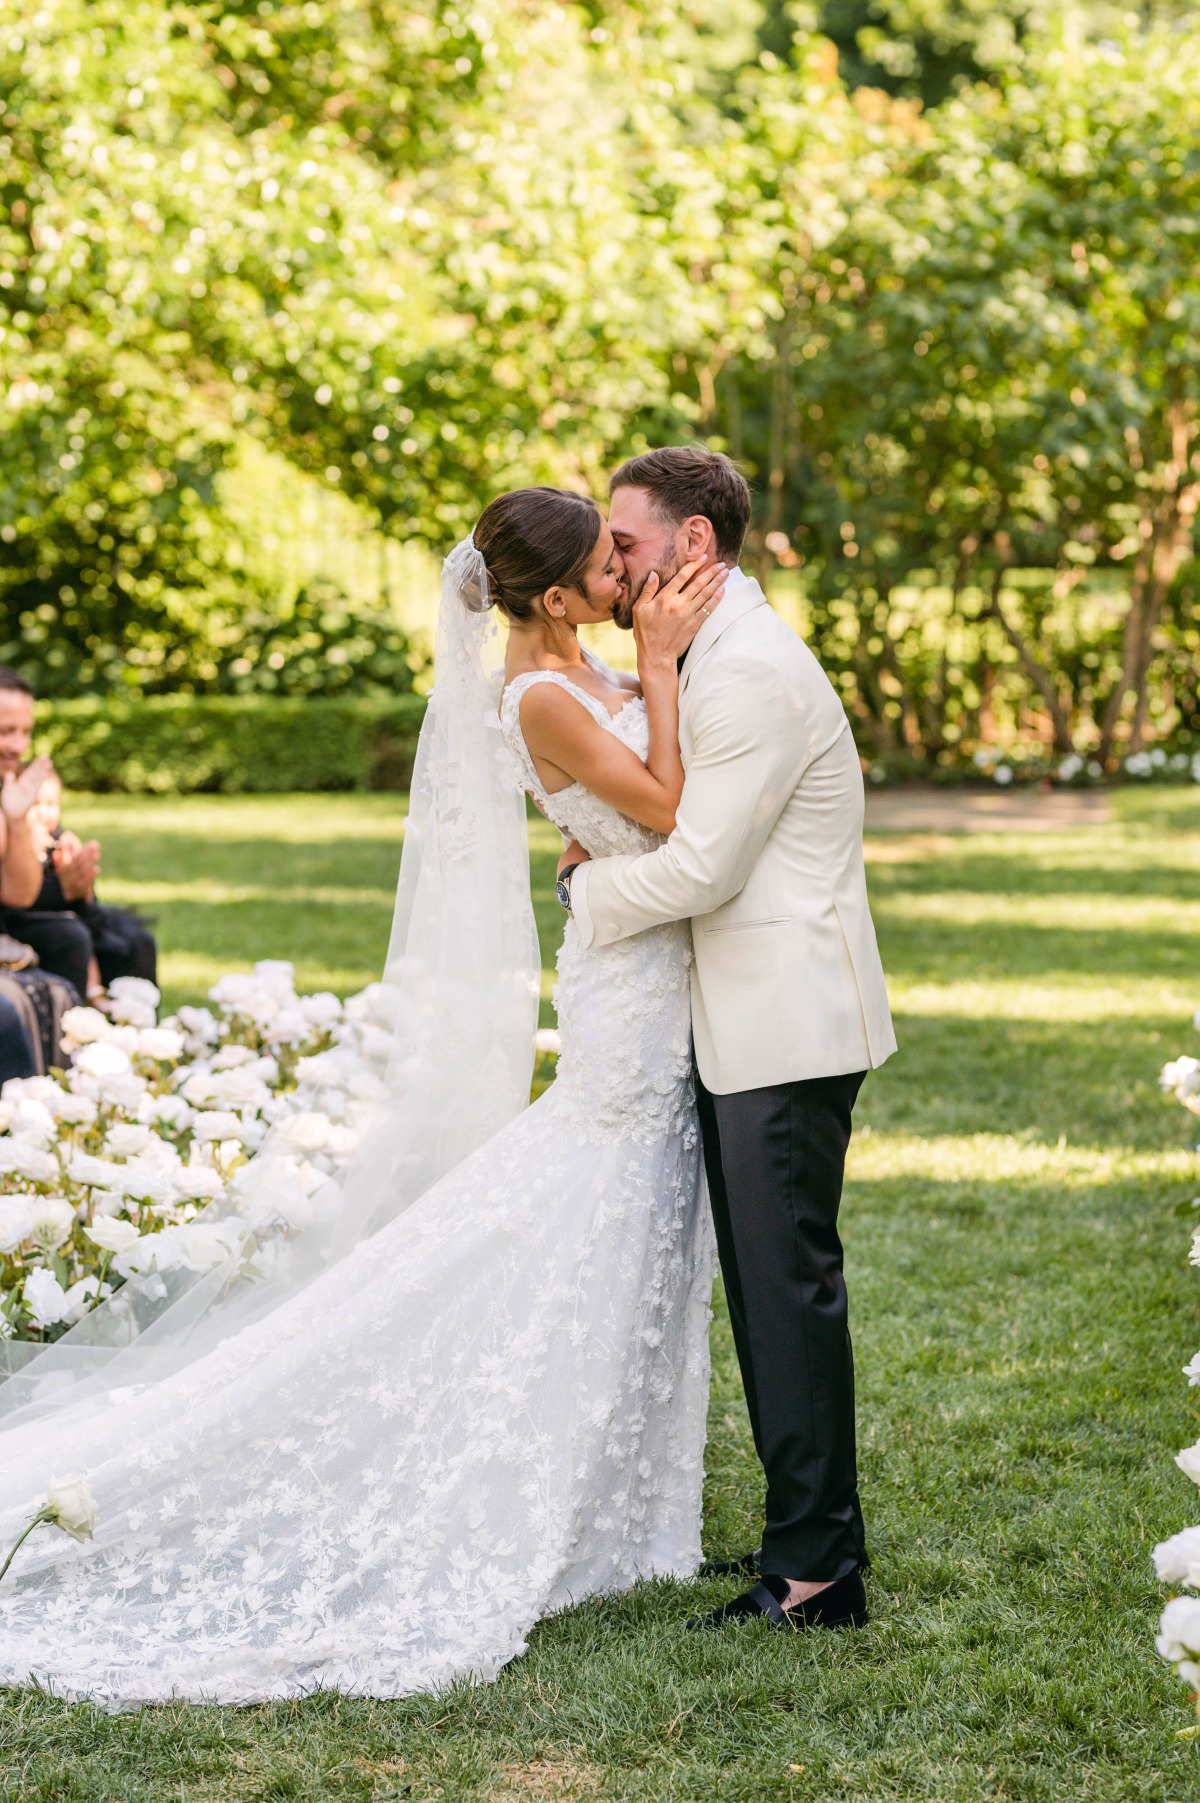 First kiss at white floral outdoor wedding ceremony 